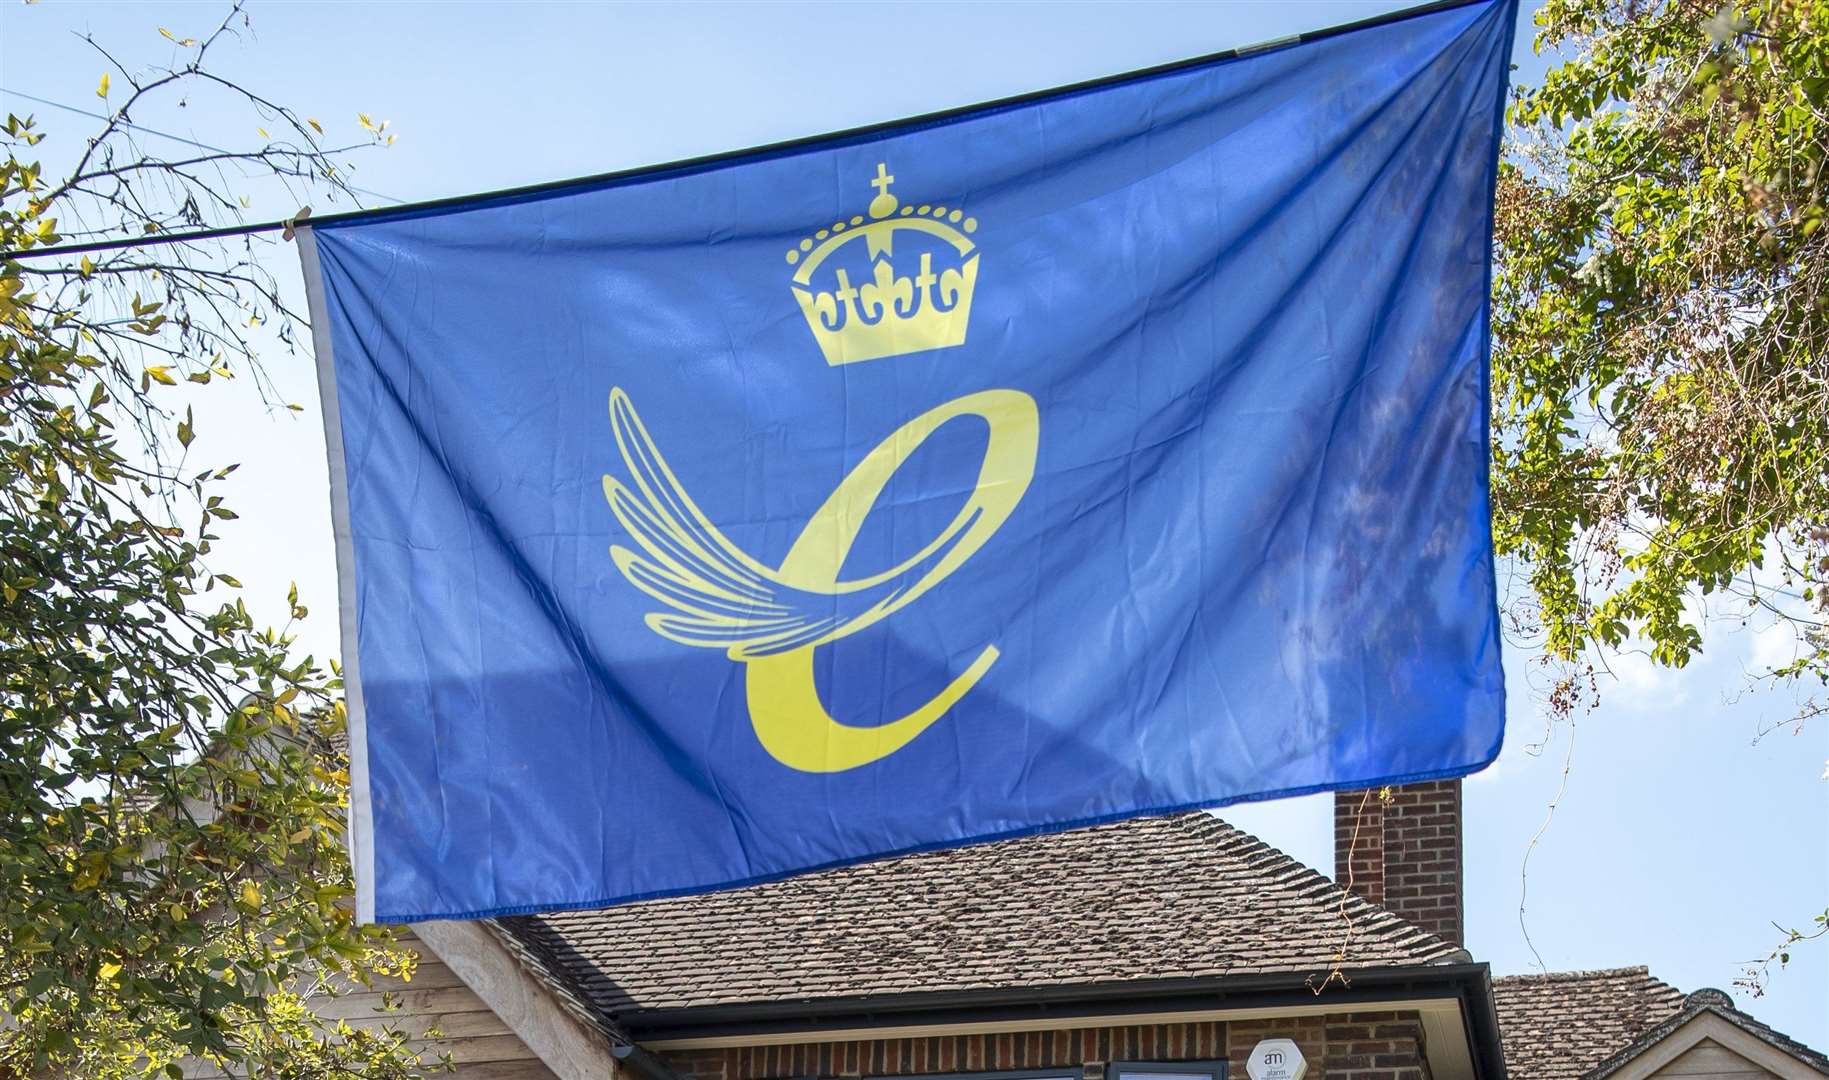 Winners get to fly the Queen's Award flag for five years